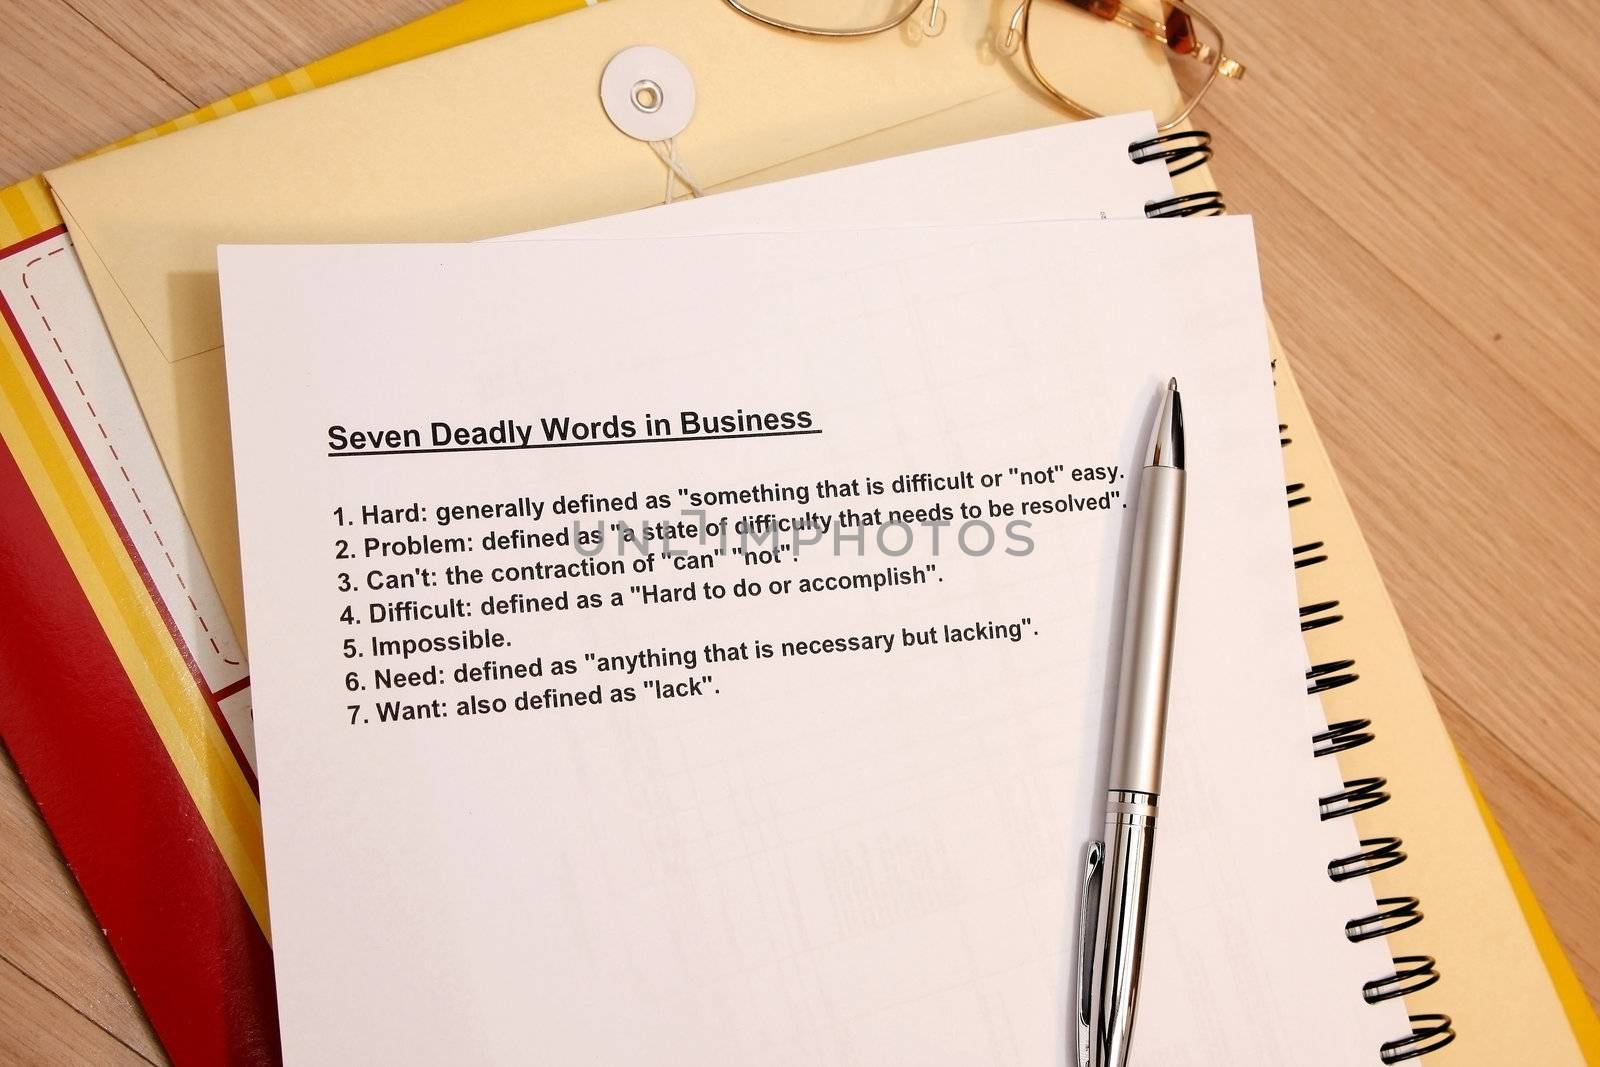 7 deadly words in business concept - use in company workshops or seminars.